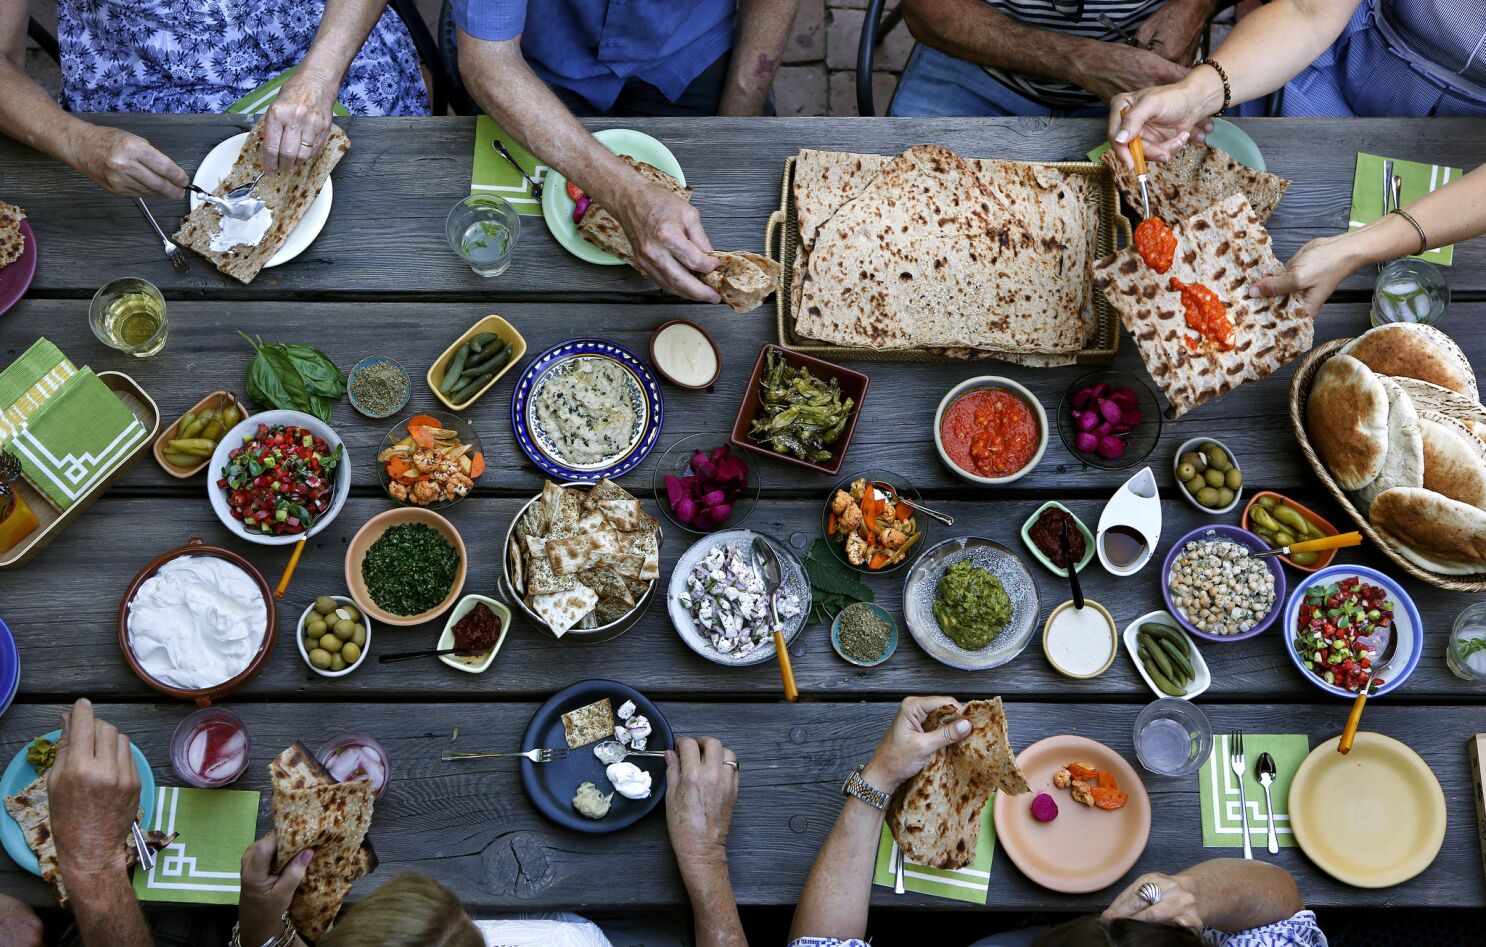 How to throw an Israeli-SoCal mezze party - Los Angeles Times